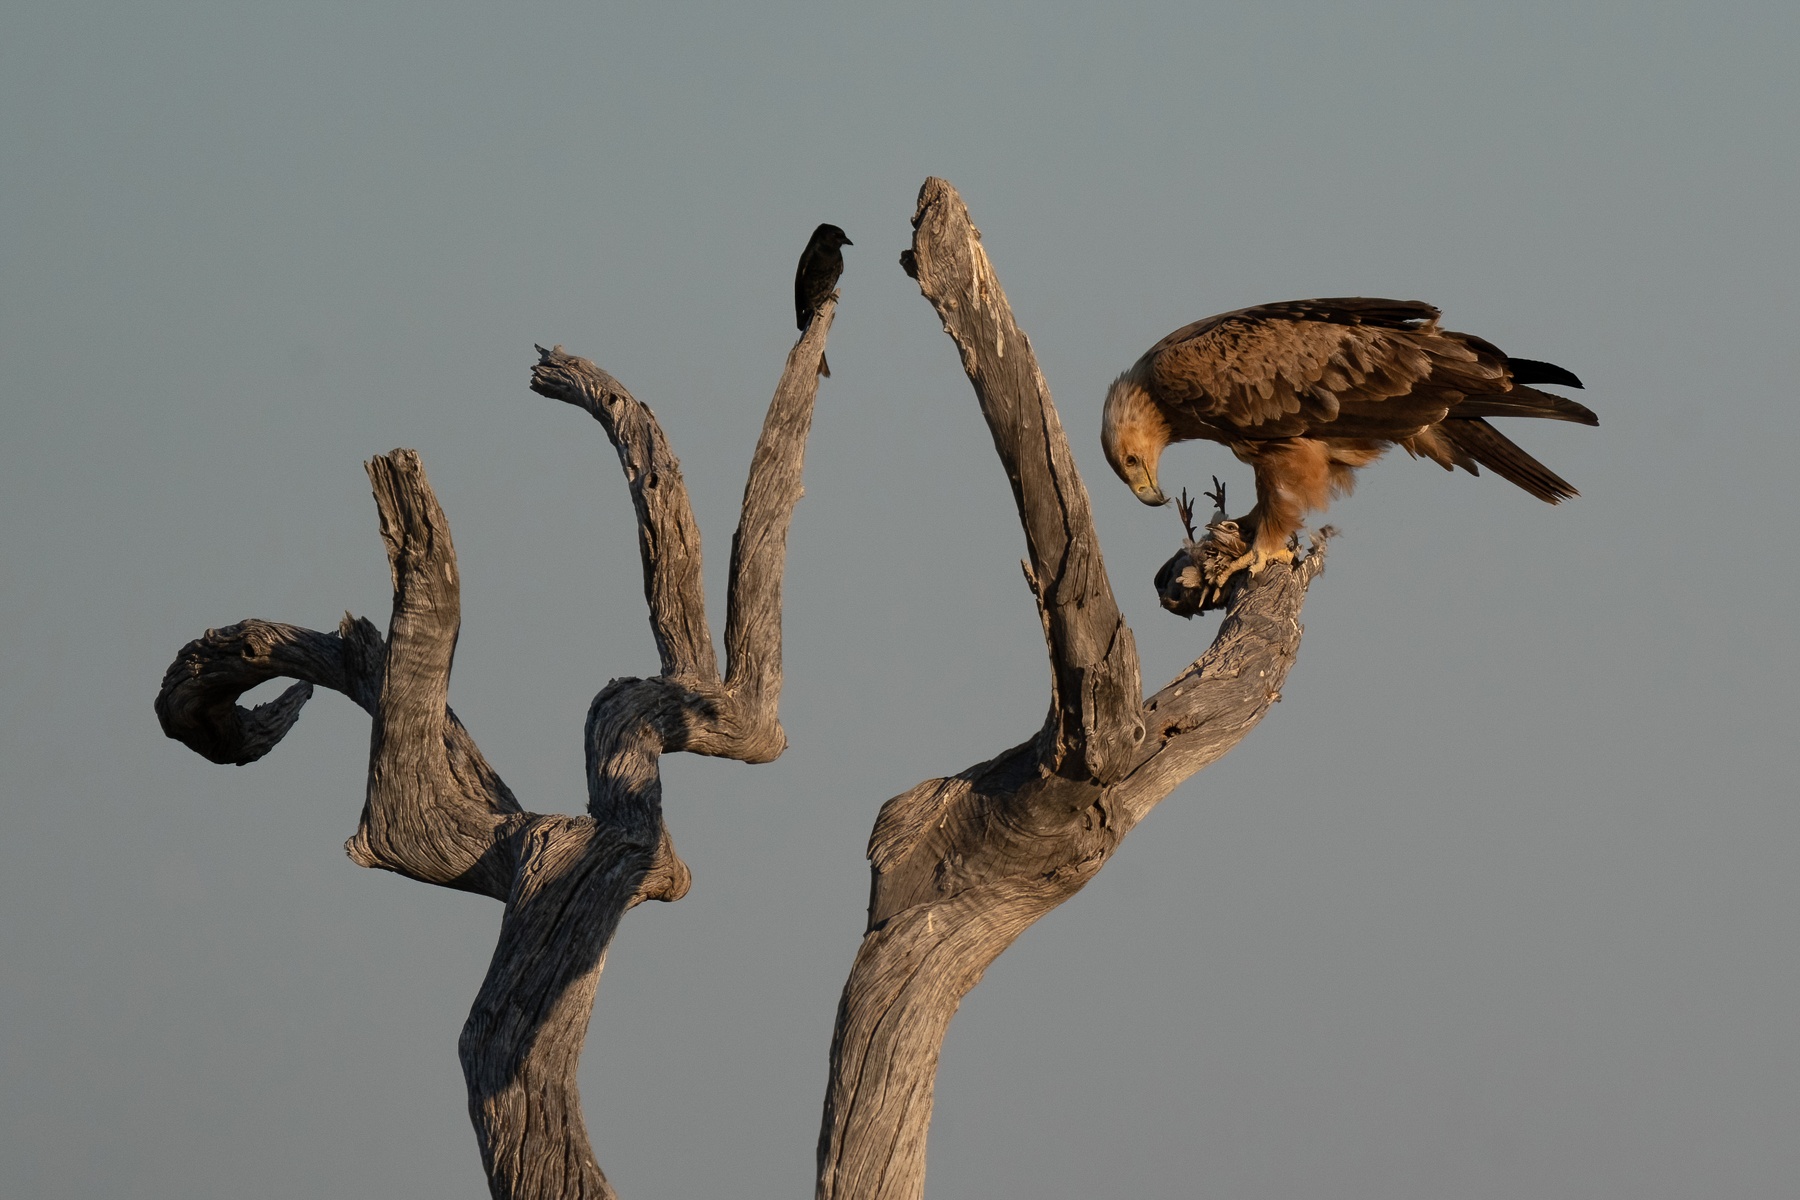 A Tawny Eagle enjoys his dinner of a Crested Francolin in Etosha